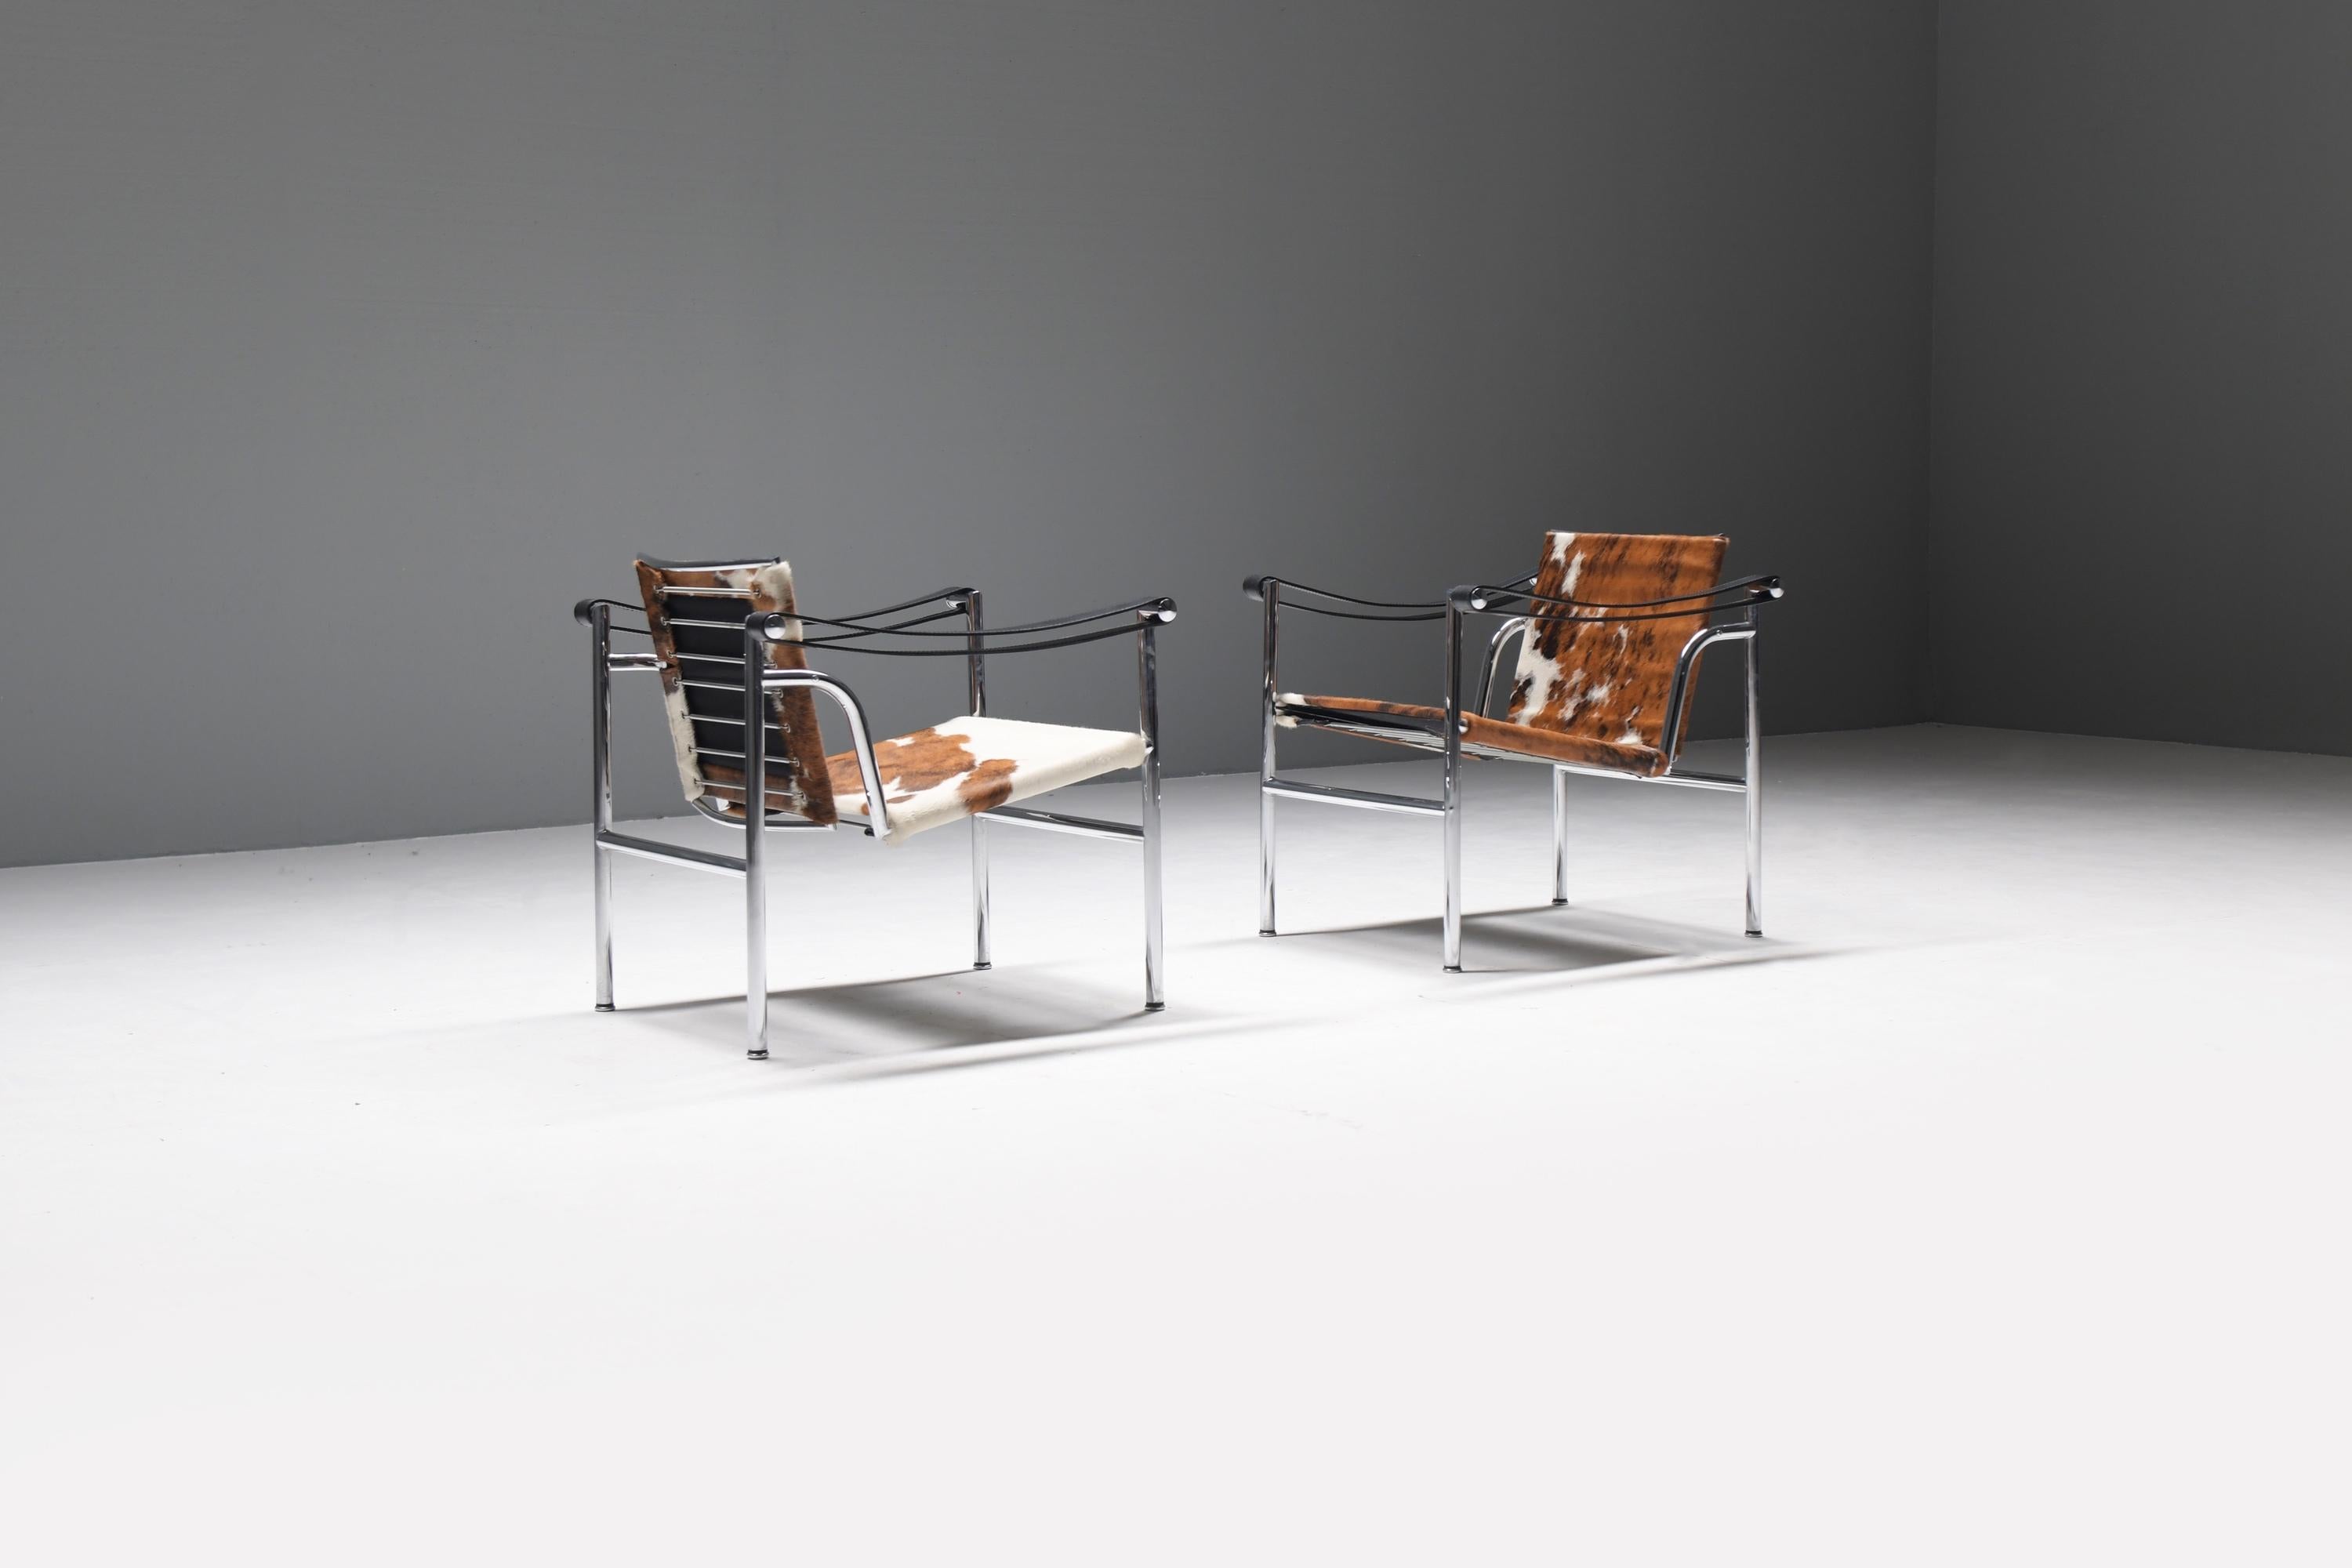 LC 1 set in horse skin - Le Corbusier, Jeanneret & Charlotte Perriand - Cassina For Sale 2